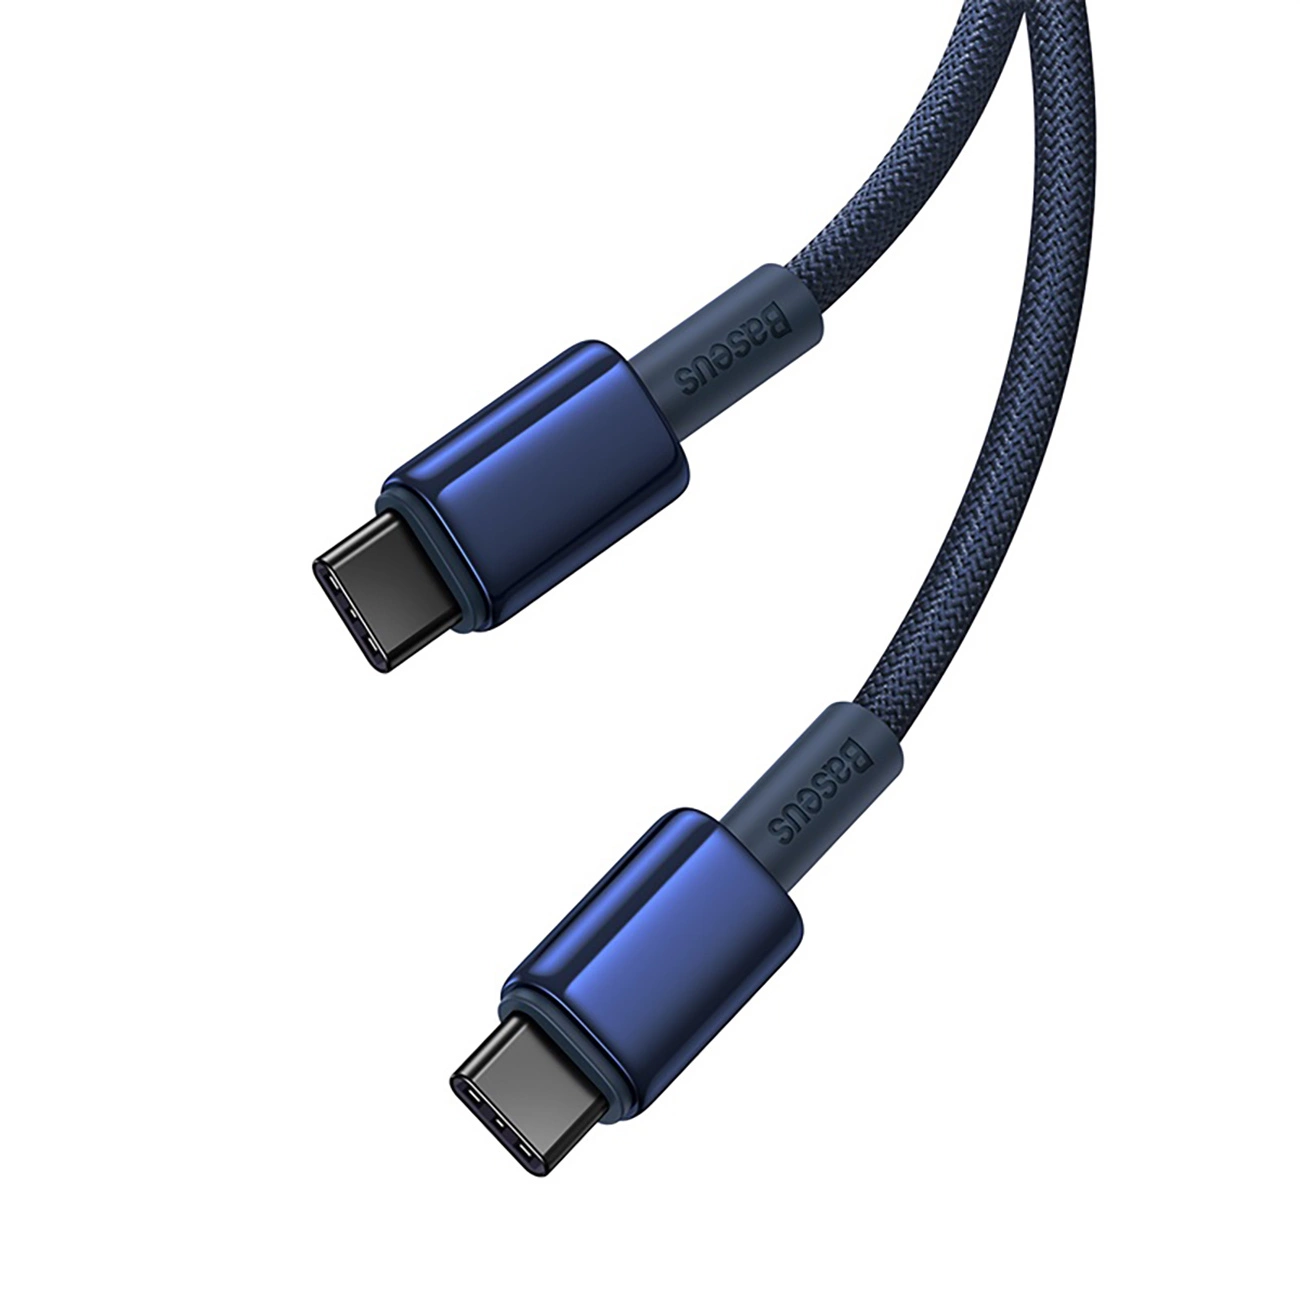 Baseus Tungsten Gold cable with USB-C / USB-C connectors with a power of up to 100W and a length of 2 m on a white background